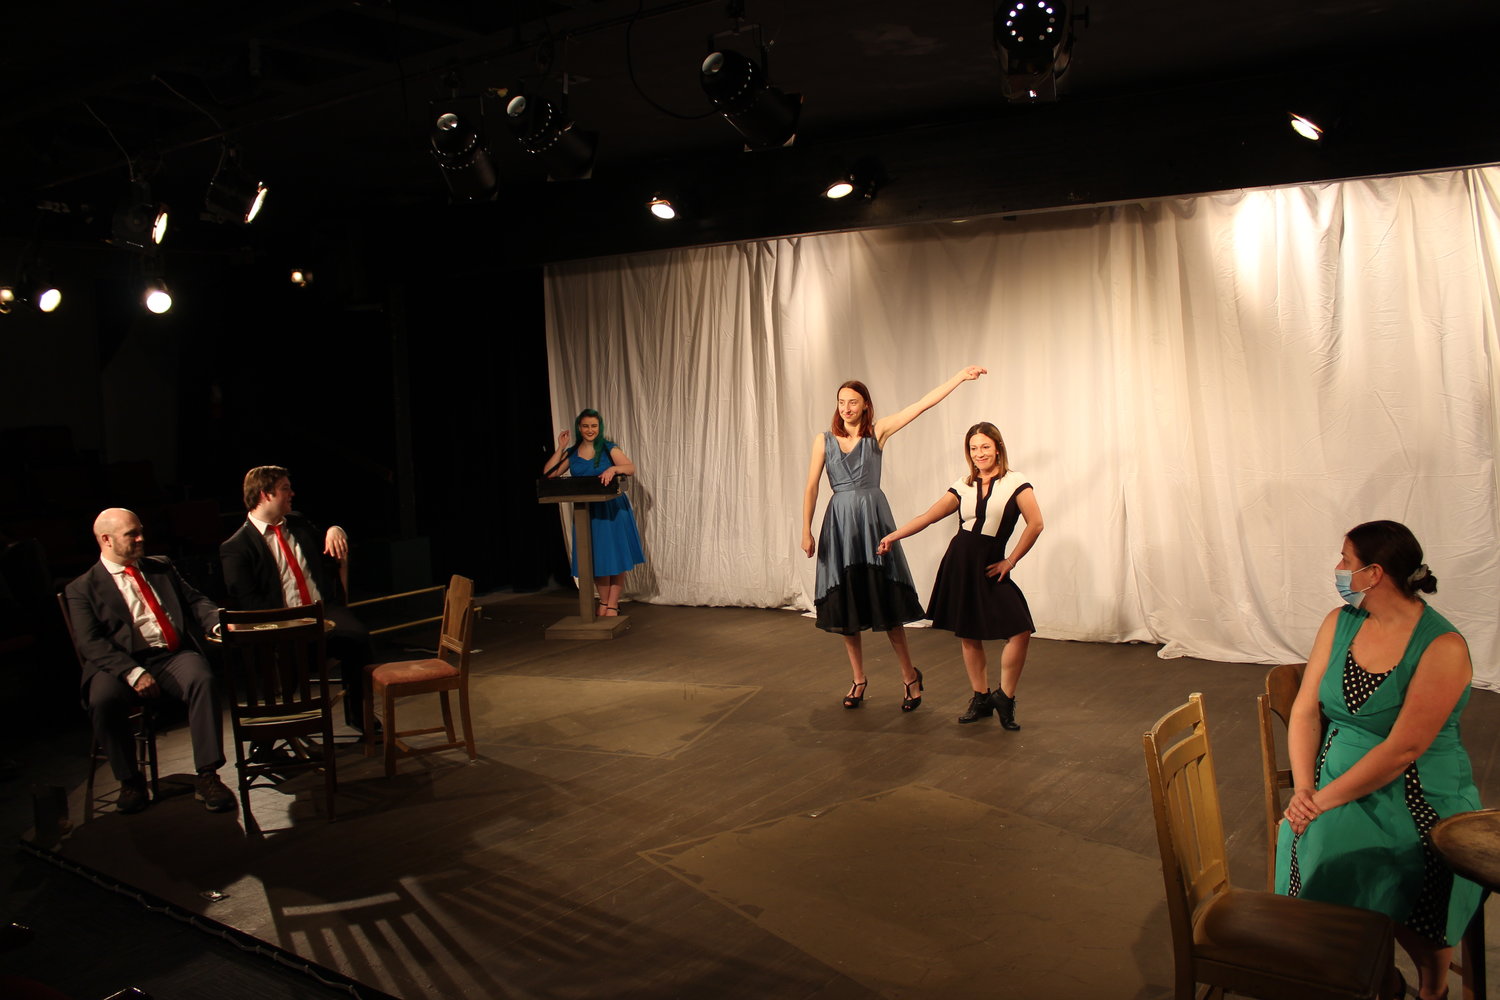 Singing duo Bob, portrayed by Noah McKenzieSullivan, and Phil, portrayed by Sean-Patrick McNeal, catch a show by singing sister duo Betty, portrayed by Melyssa Johnson, and Judy, portrayed by Lizzie Conner. Also pictured is cigarette girl, portrayed by Brittany Wilcox, and Rhoda, portrayed by Nicole Gal